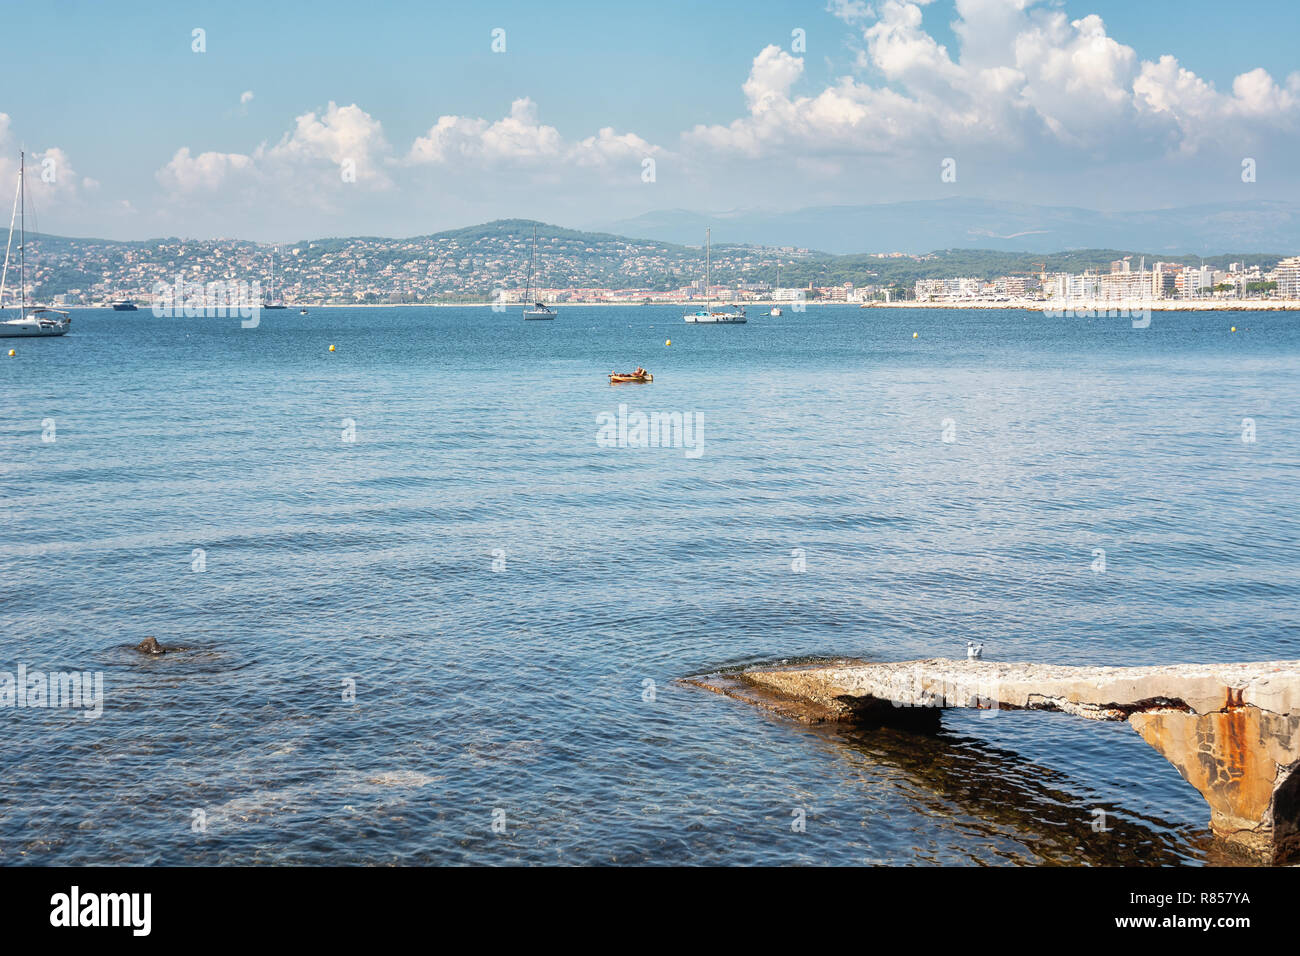 Juan-les-Pins, France, September 19, 2018: kayaker resting in the Golfe Juan with in the background the hotels of the French city of Juan-les-Pins Stock Photo